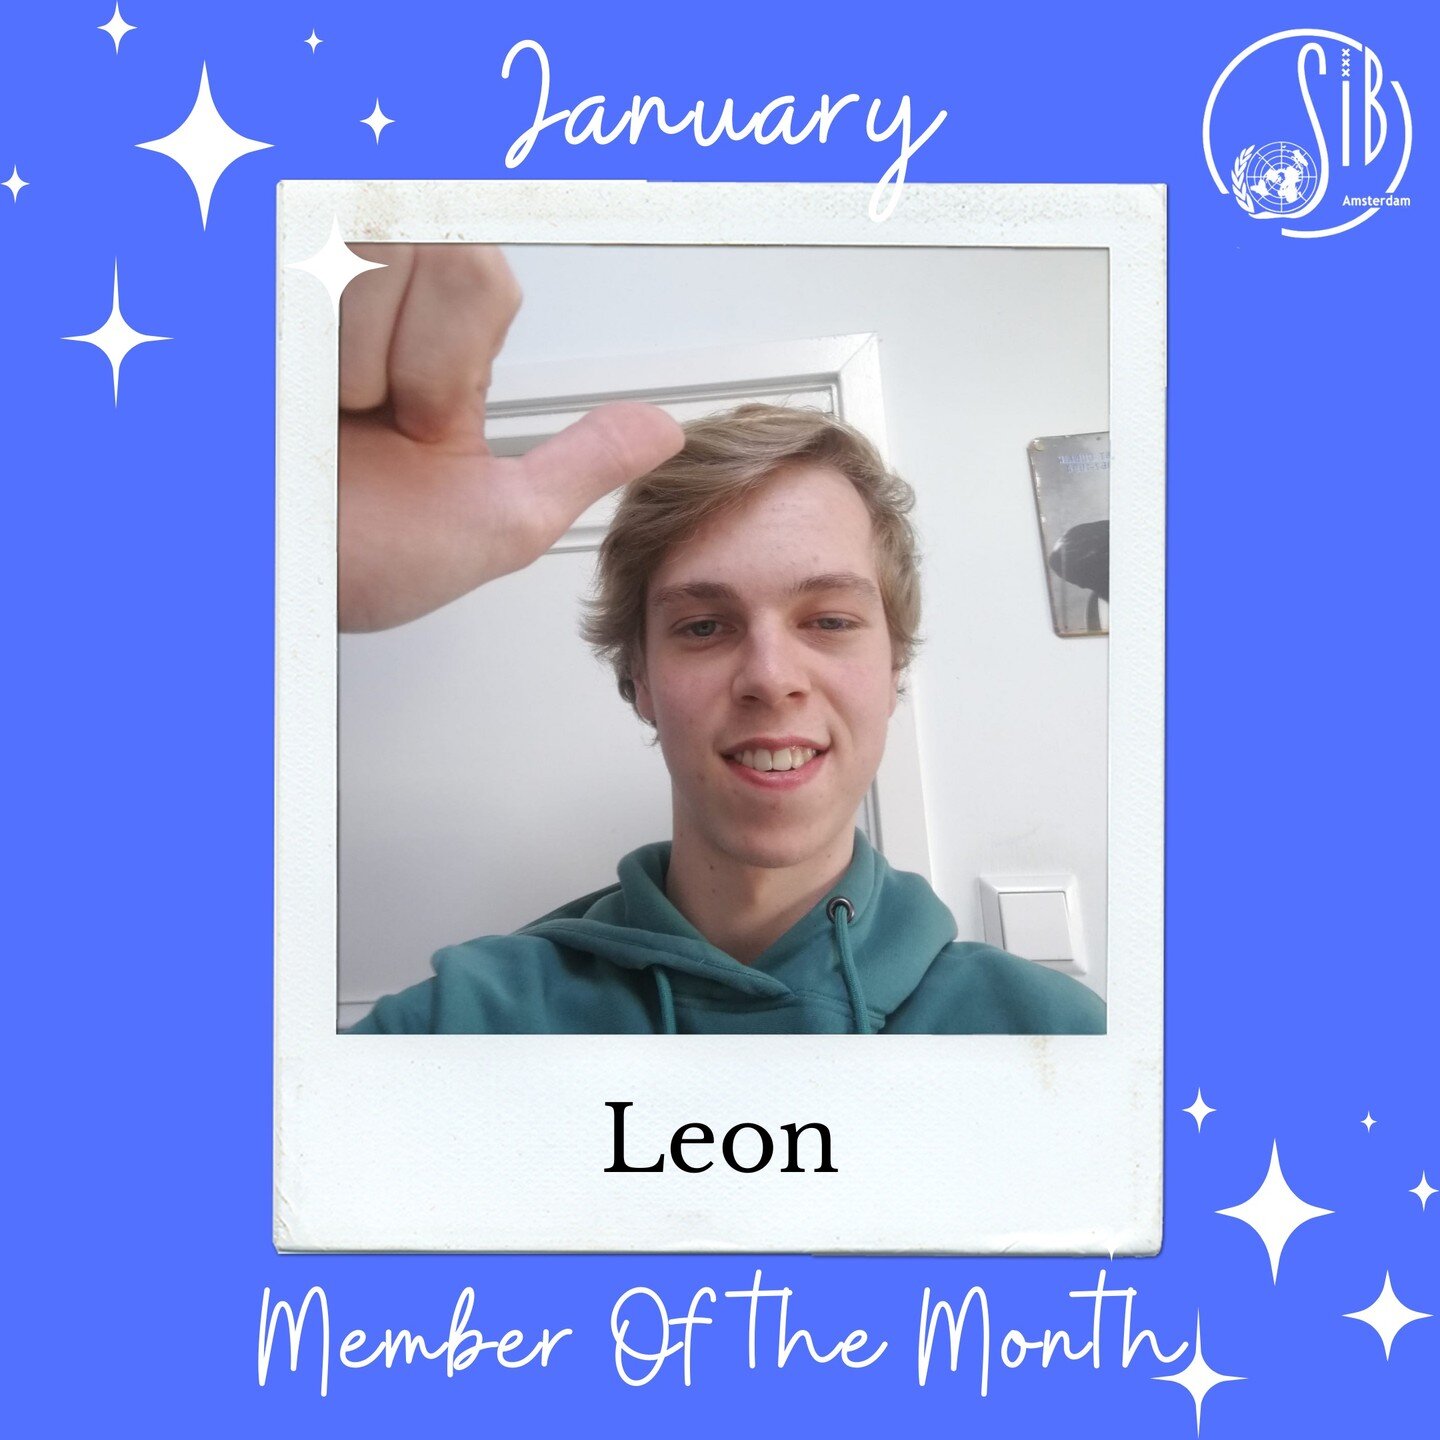 We are proud to announce SIB's Member of the Month January!✨

Leon became a member of SIB in November and joined almost all activities that we hosted in January.

&quot;Dear members, 

It is an unreal honour for me to be chosen as member of the month